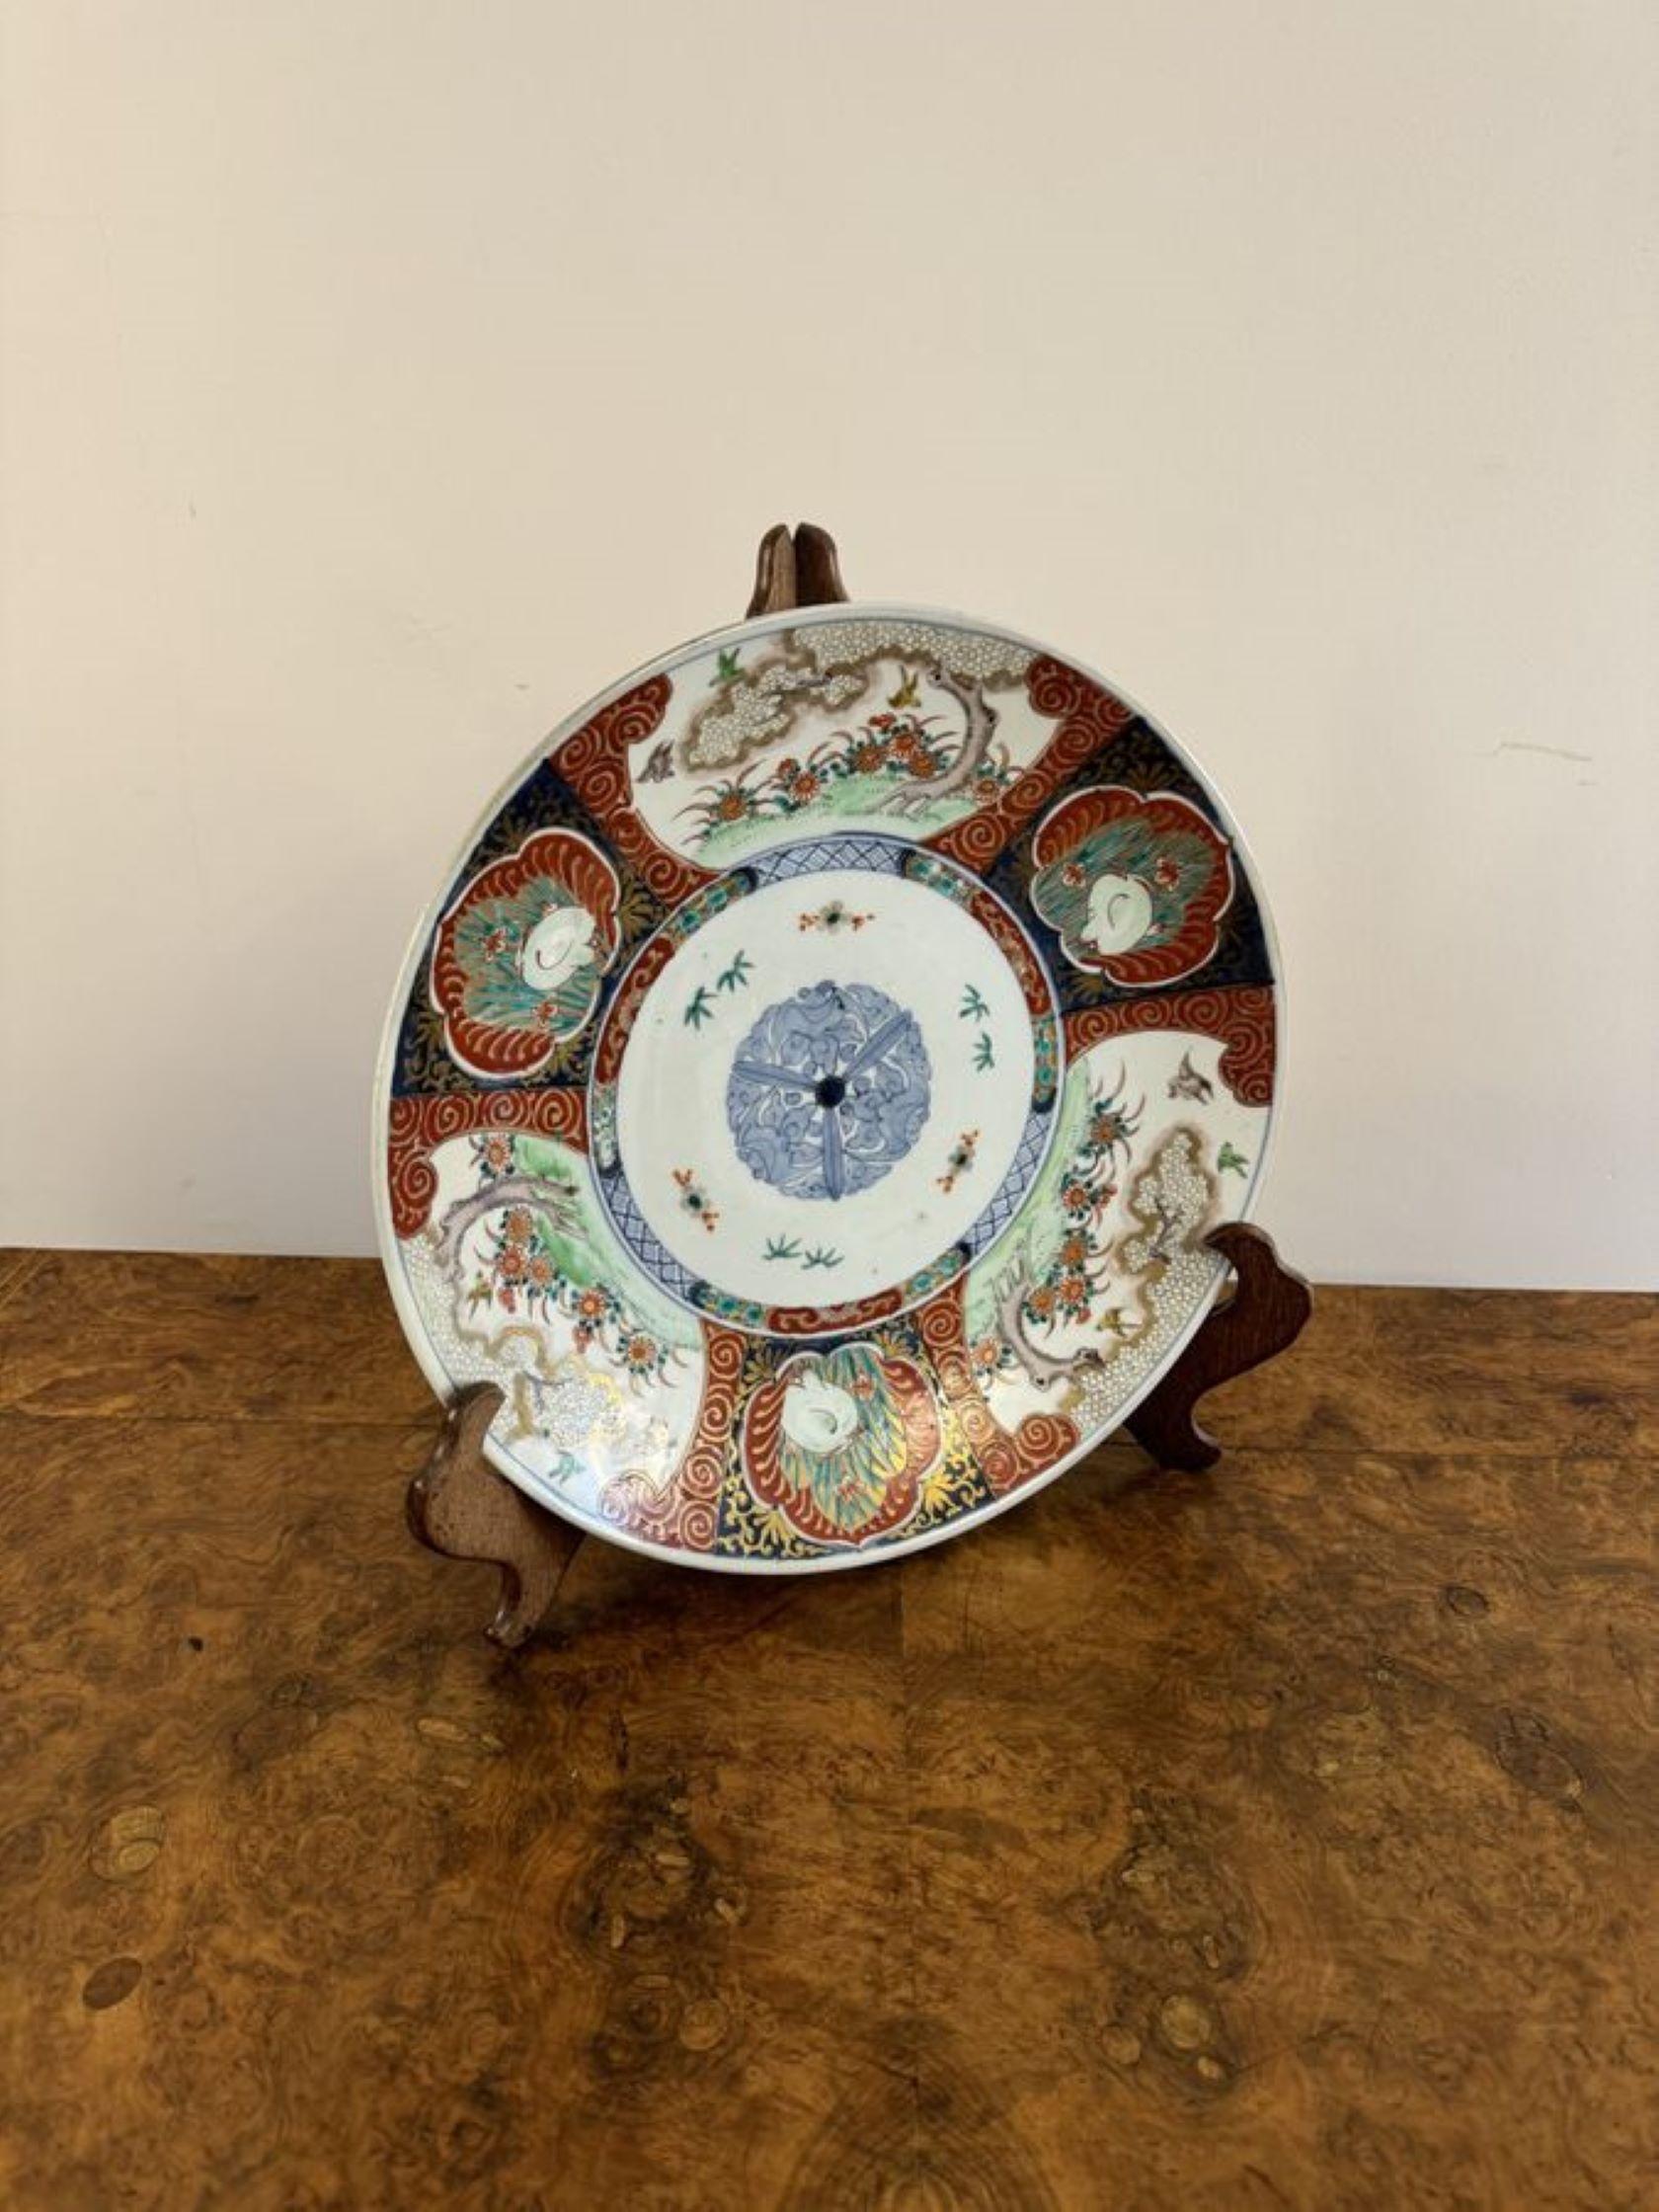 Quality antique Japanese imari plate, having a quality antique Japanese imari plate decorated with flowers, trees, birds and scrolls hand painted in wonderful red, green blue, white and gold colours.

D. 1900